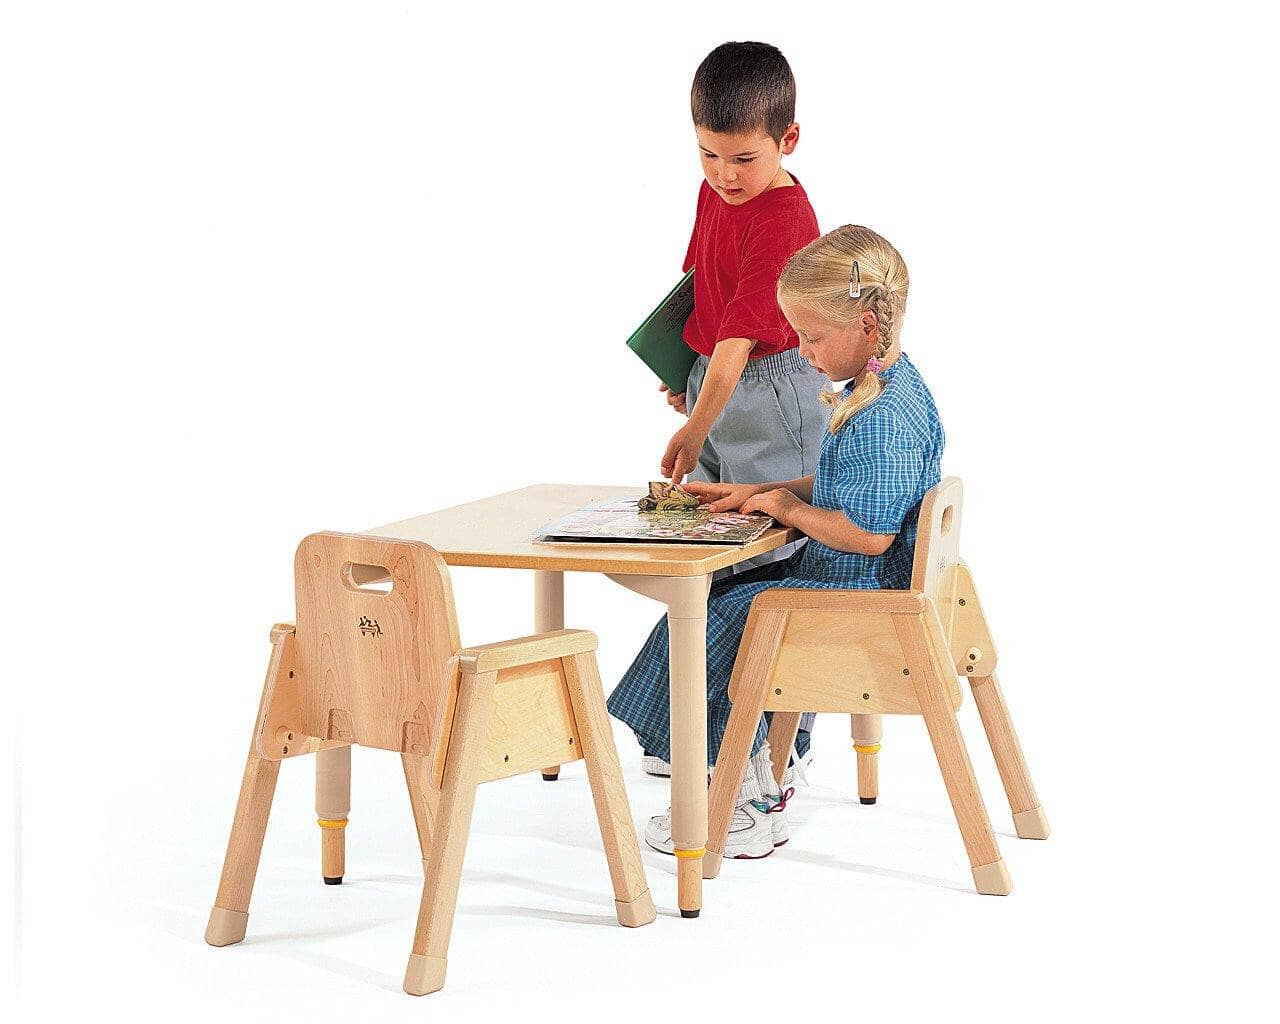 Childshape Chairs by Community Playthings - 8"H Furnishings Community Playthings for child care day care primary classrooms